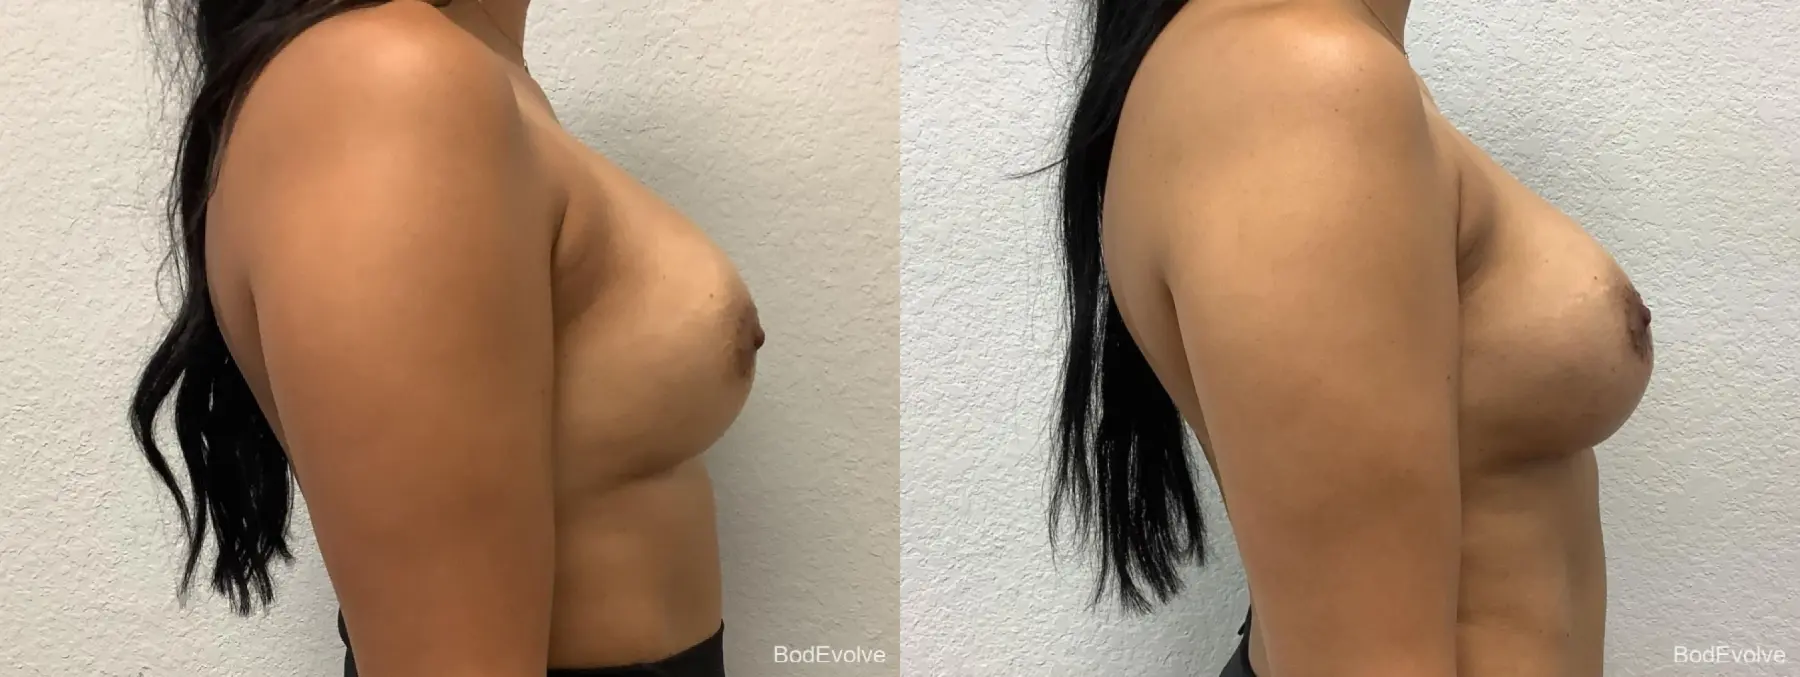 Breast Revision: Patient 2 - Before and After 5